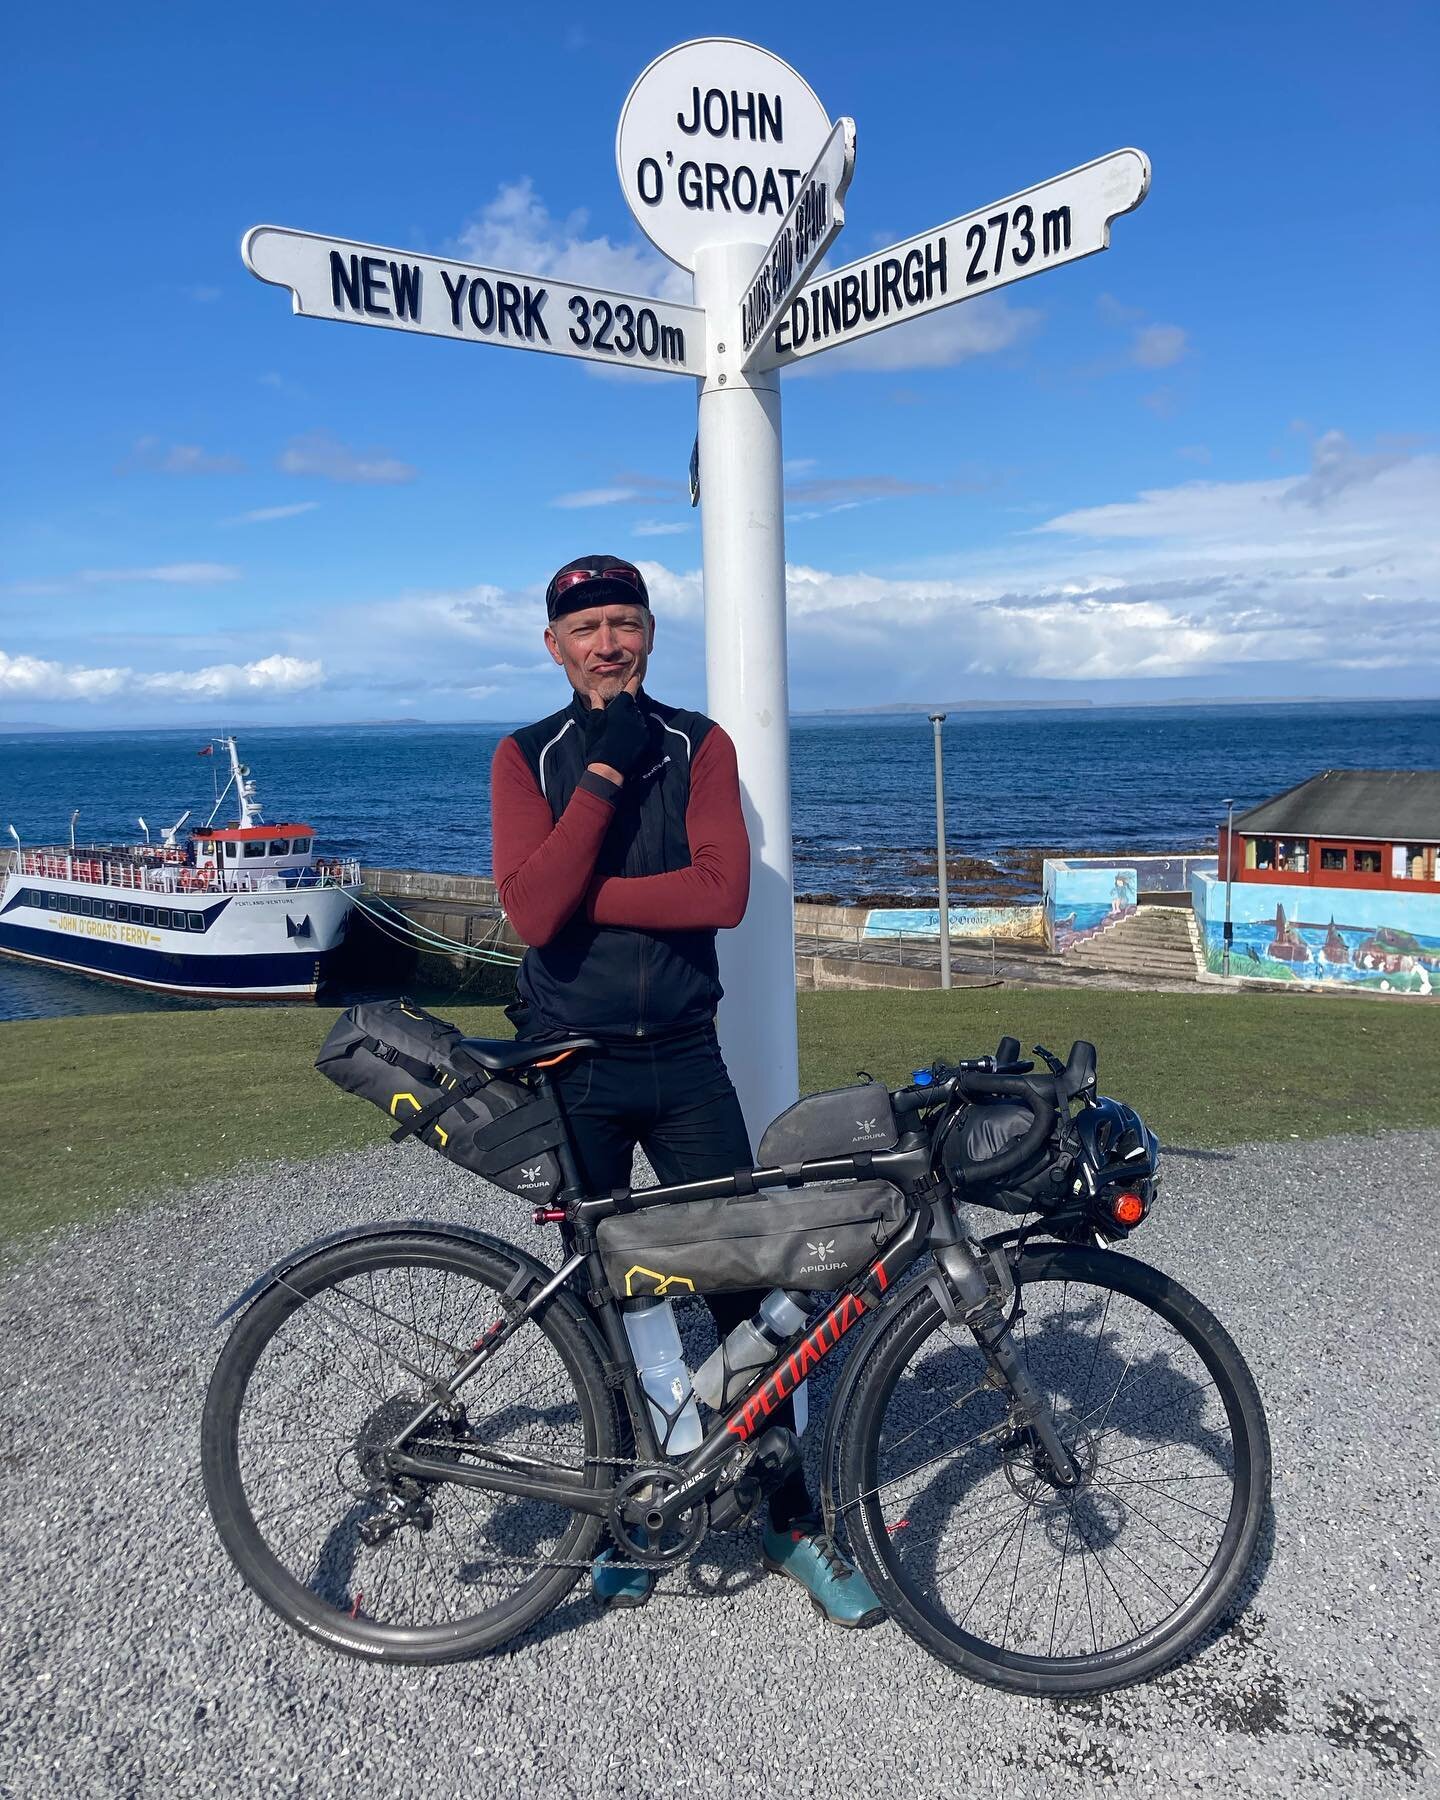 As the dear reader will know - I&rsquo;m not one to boast, however, I just cycled Land&rsquo;s End to John o&rsquo; Groats in 7 days, unsupported, wild camping most of it. Not all hero&rsquo;s wear capes, some wear lycra #lejog #cyclingadventures